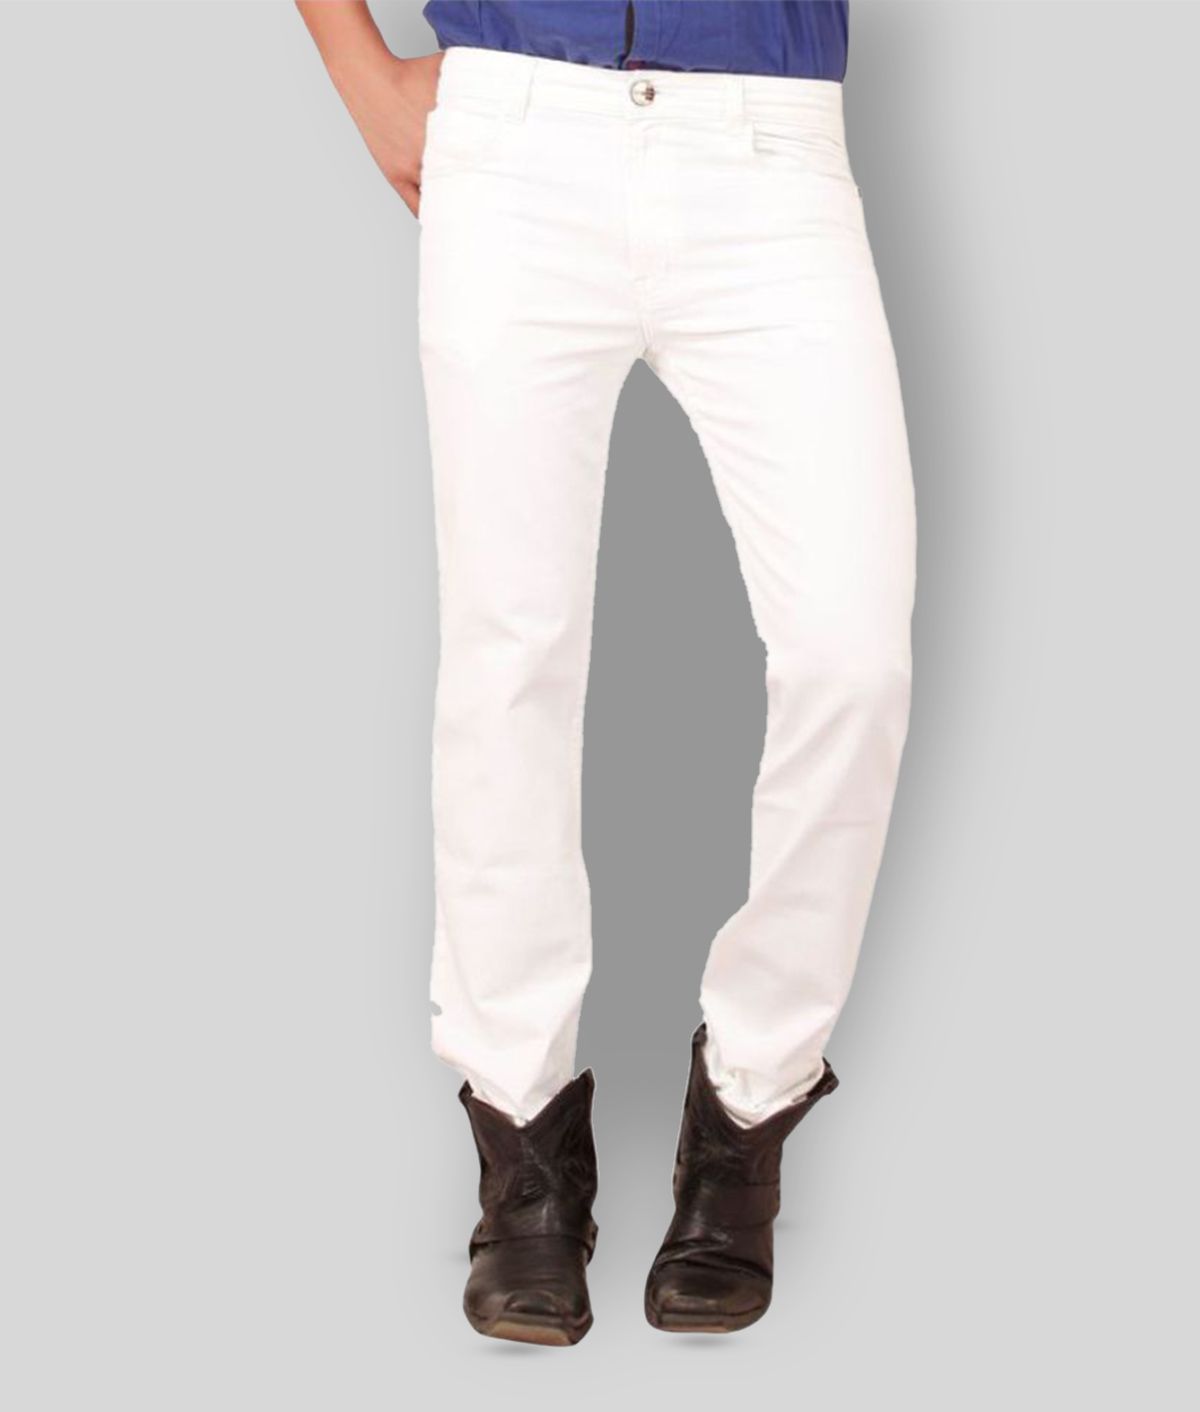     			Lawson - White Cotton Blend Skinny Fit Men's Jeans ( Pack of 1 )